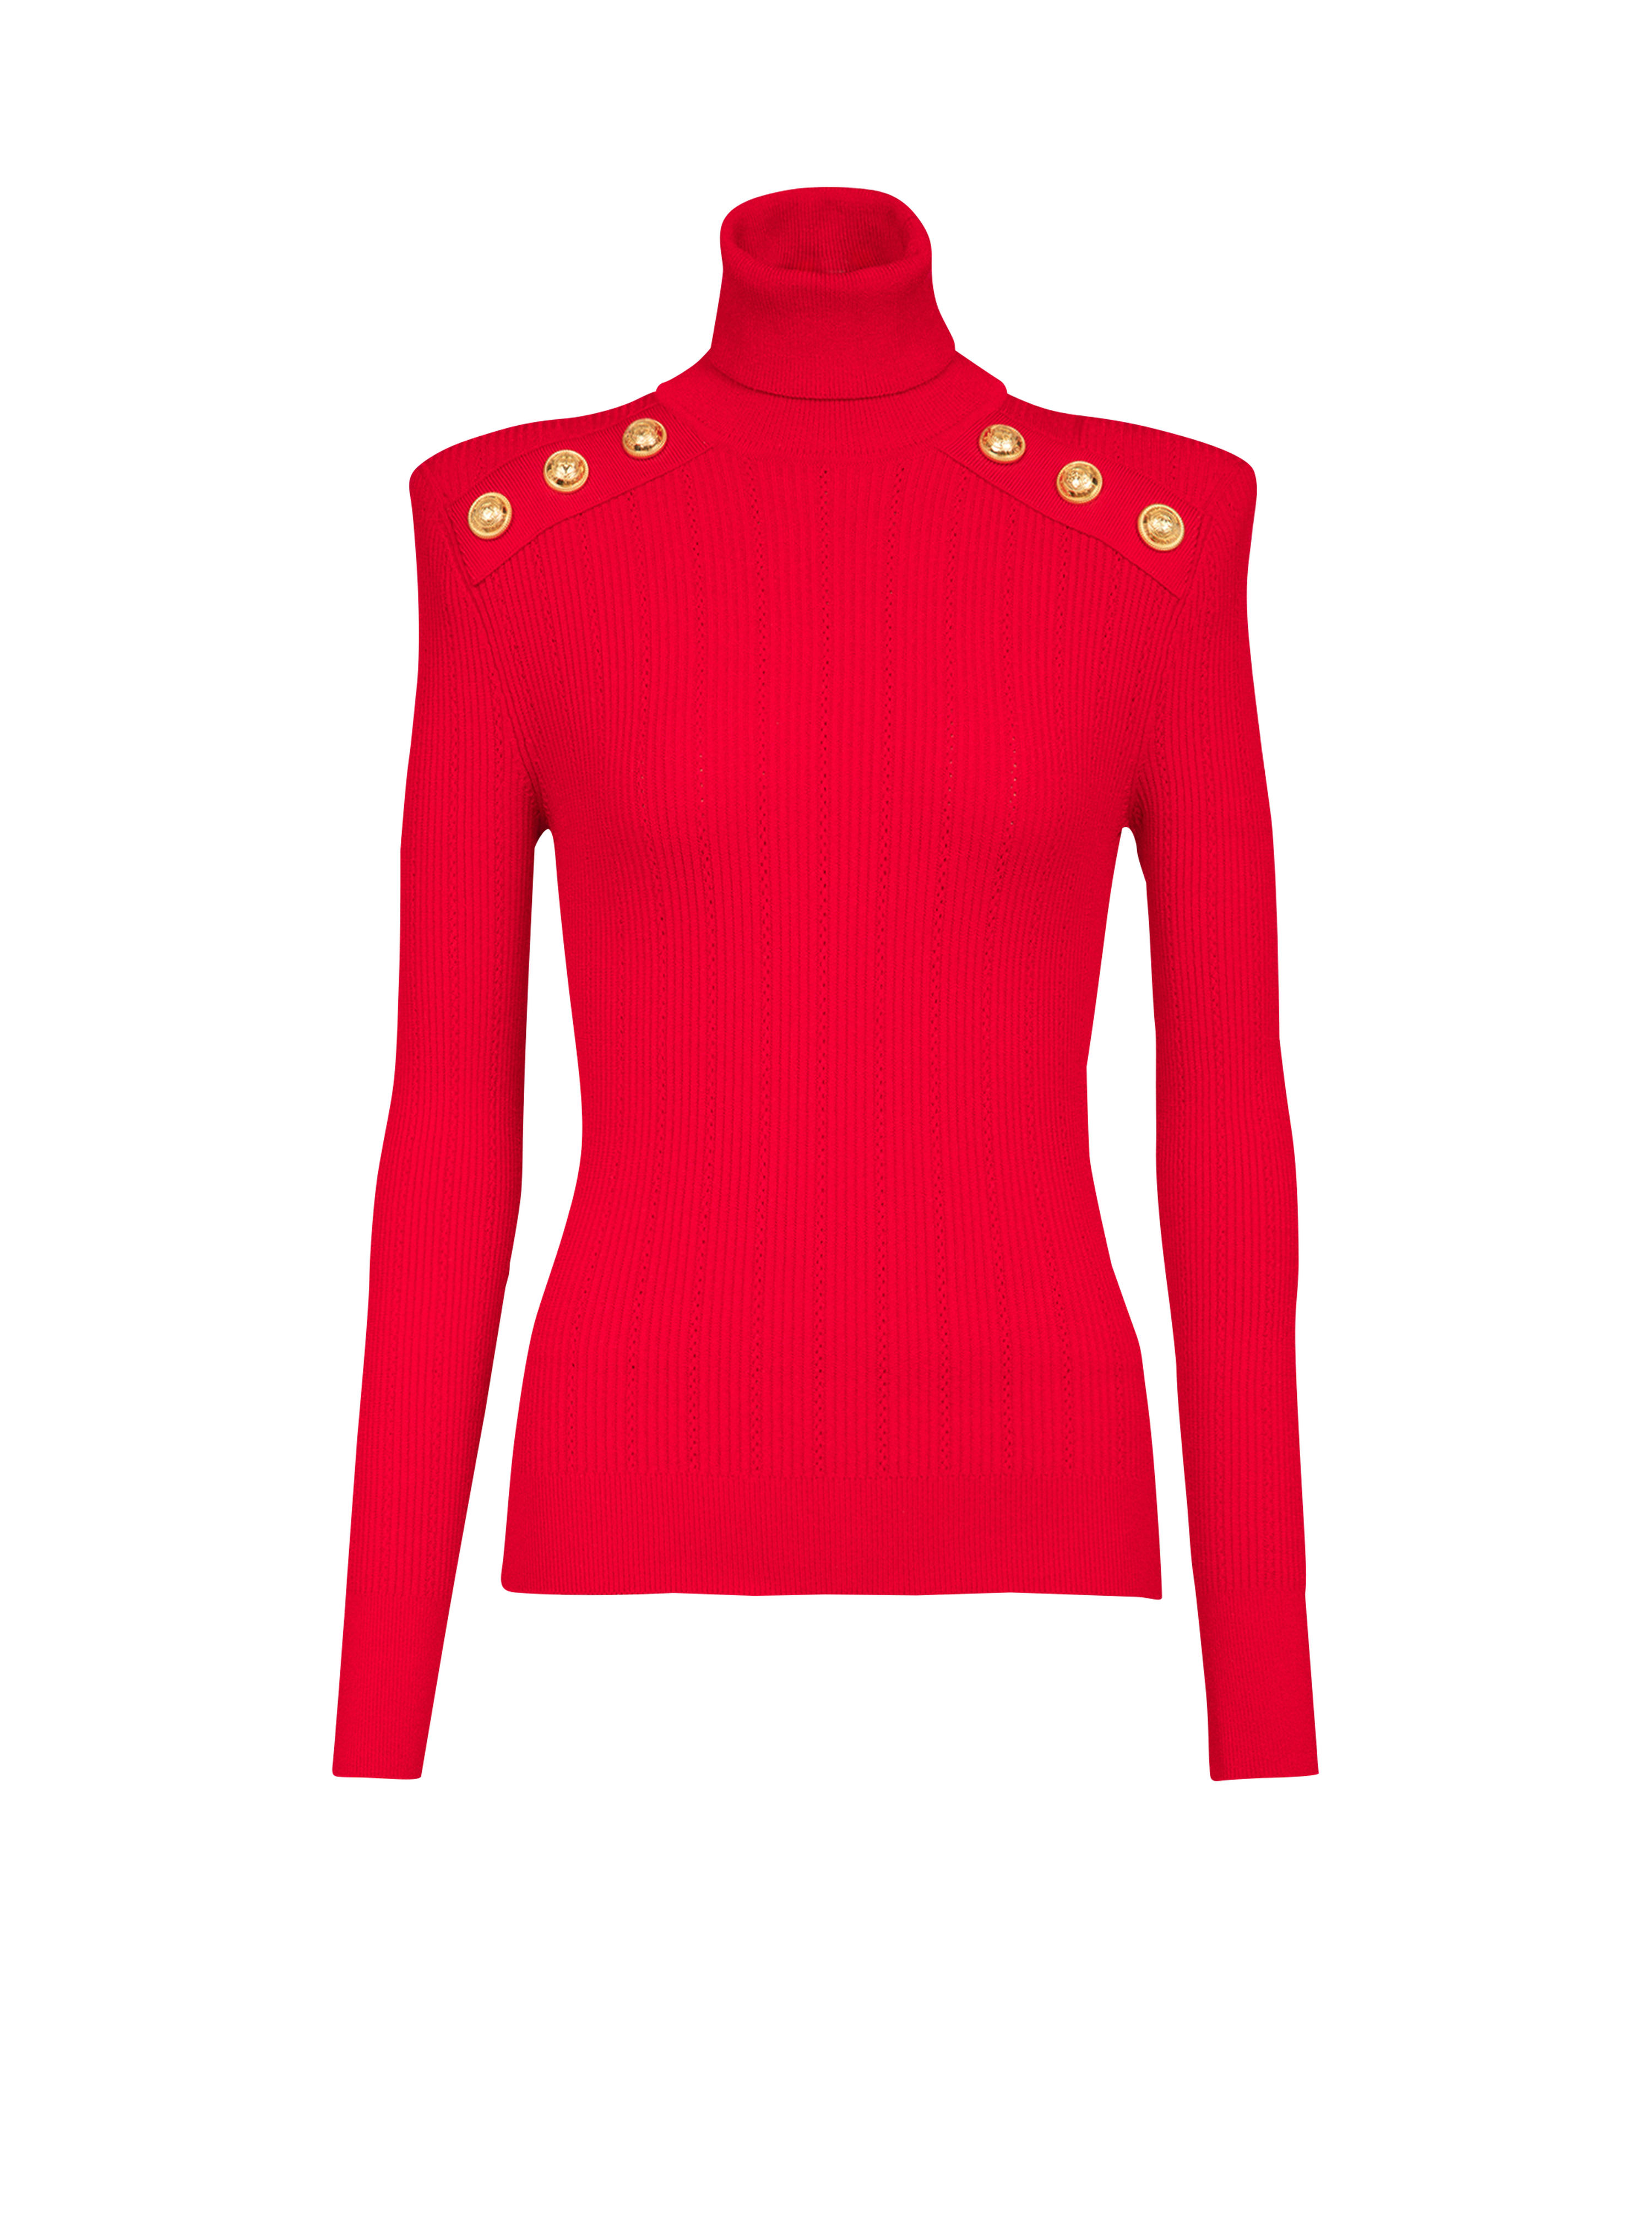 Knit sweater with gold-tone buttons, red